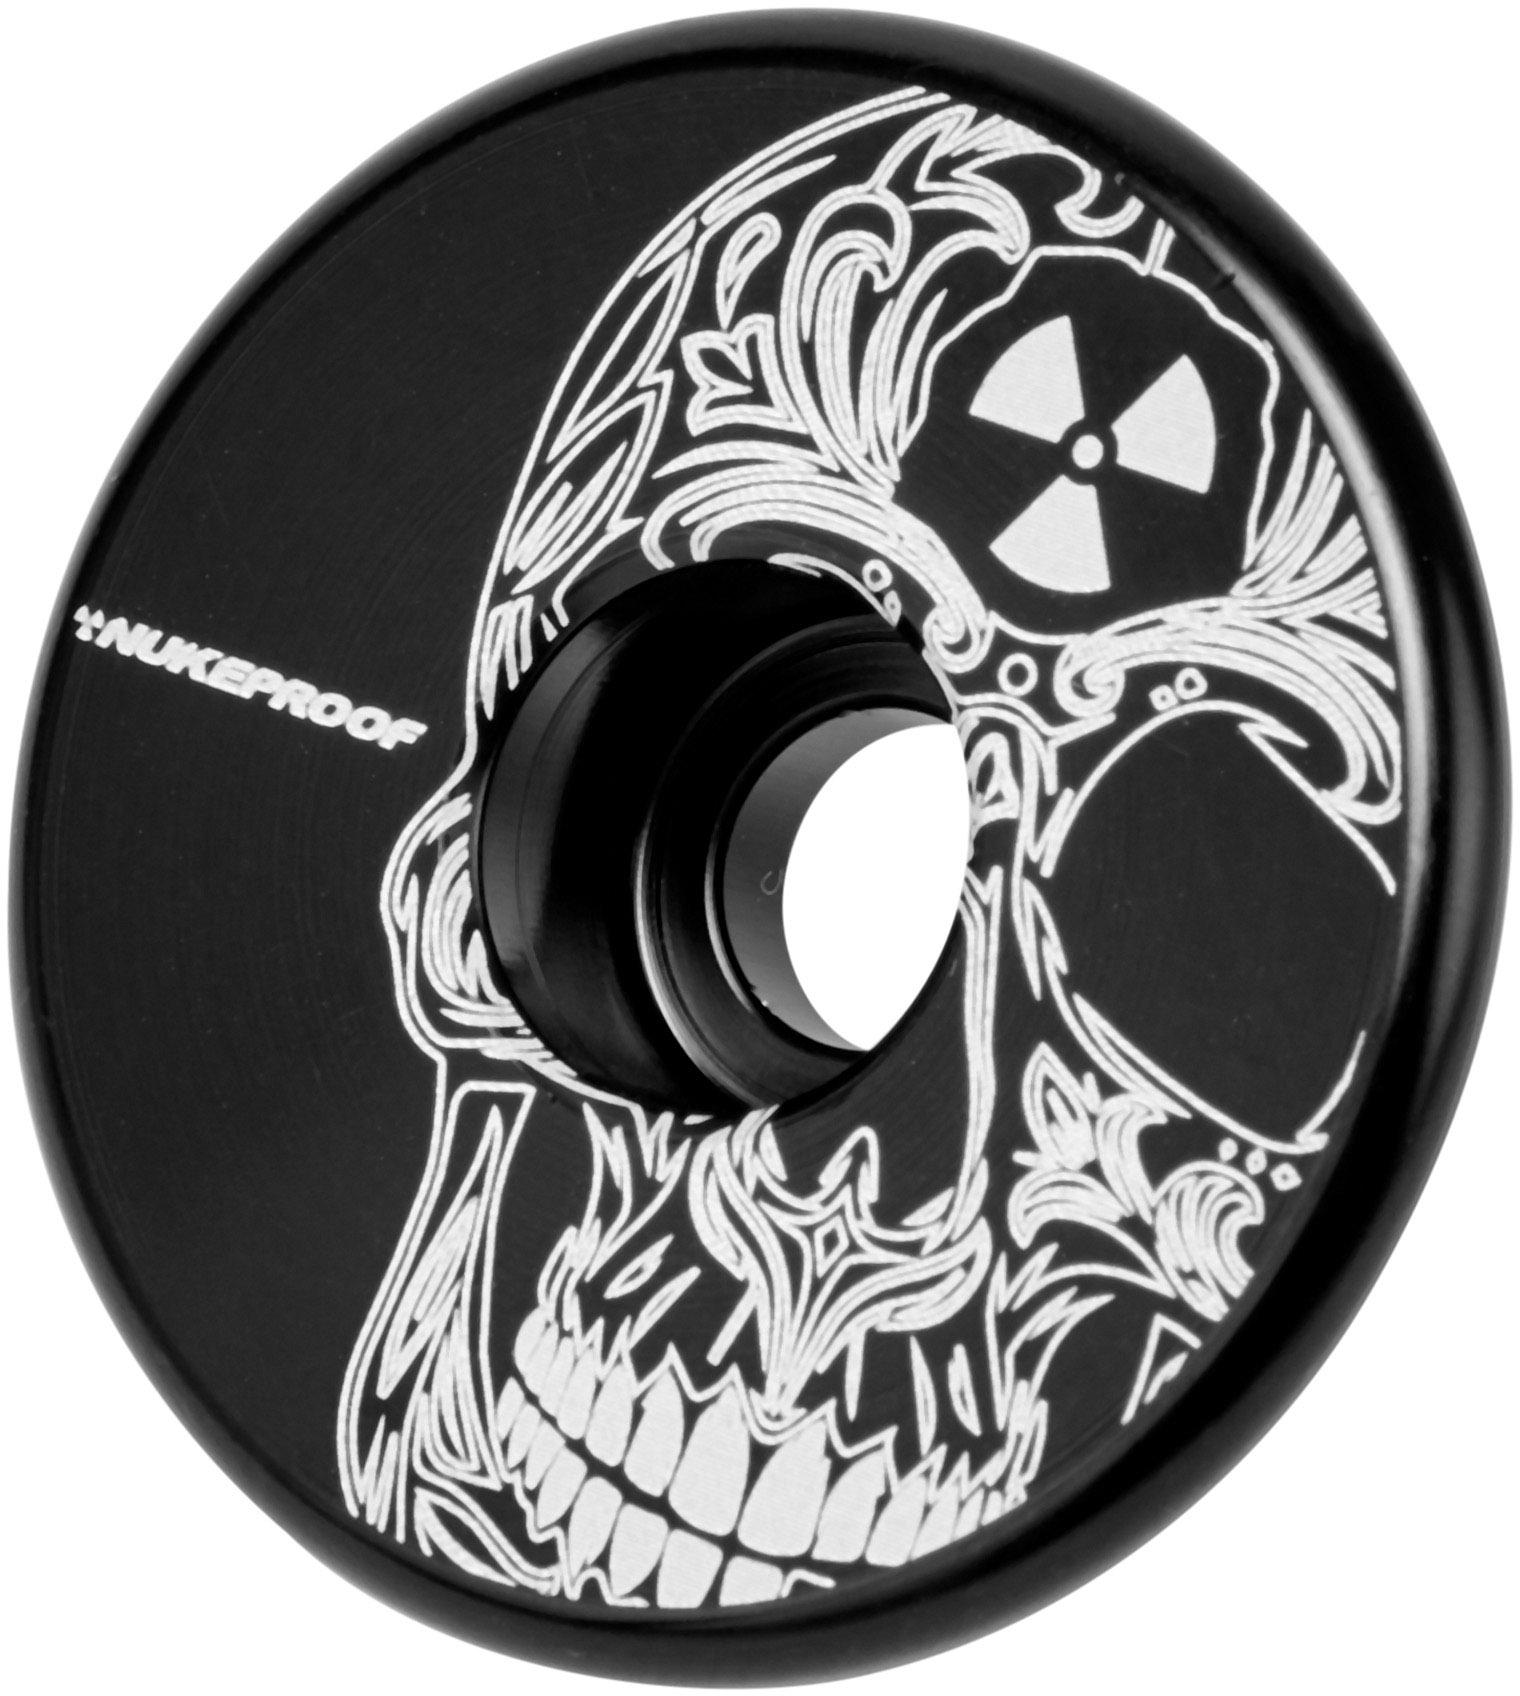 Nukeproof Top Cap And Star Nut - Skull